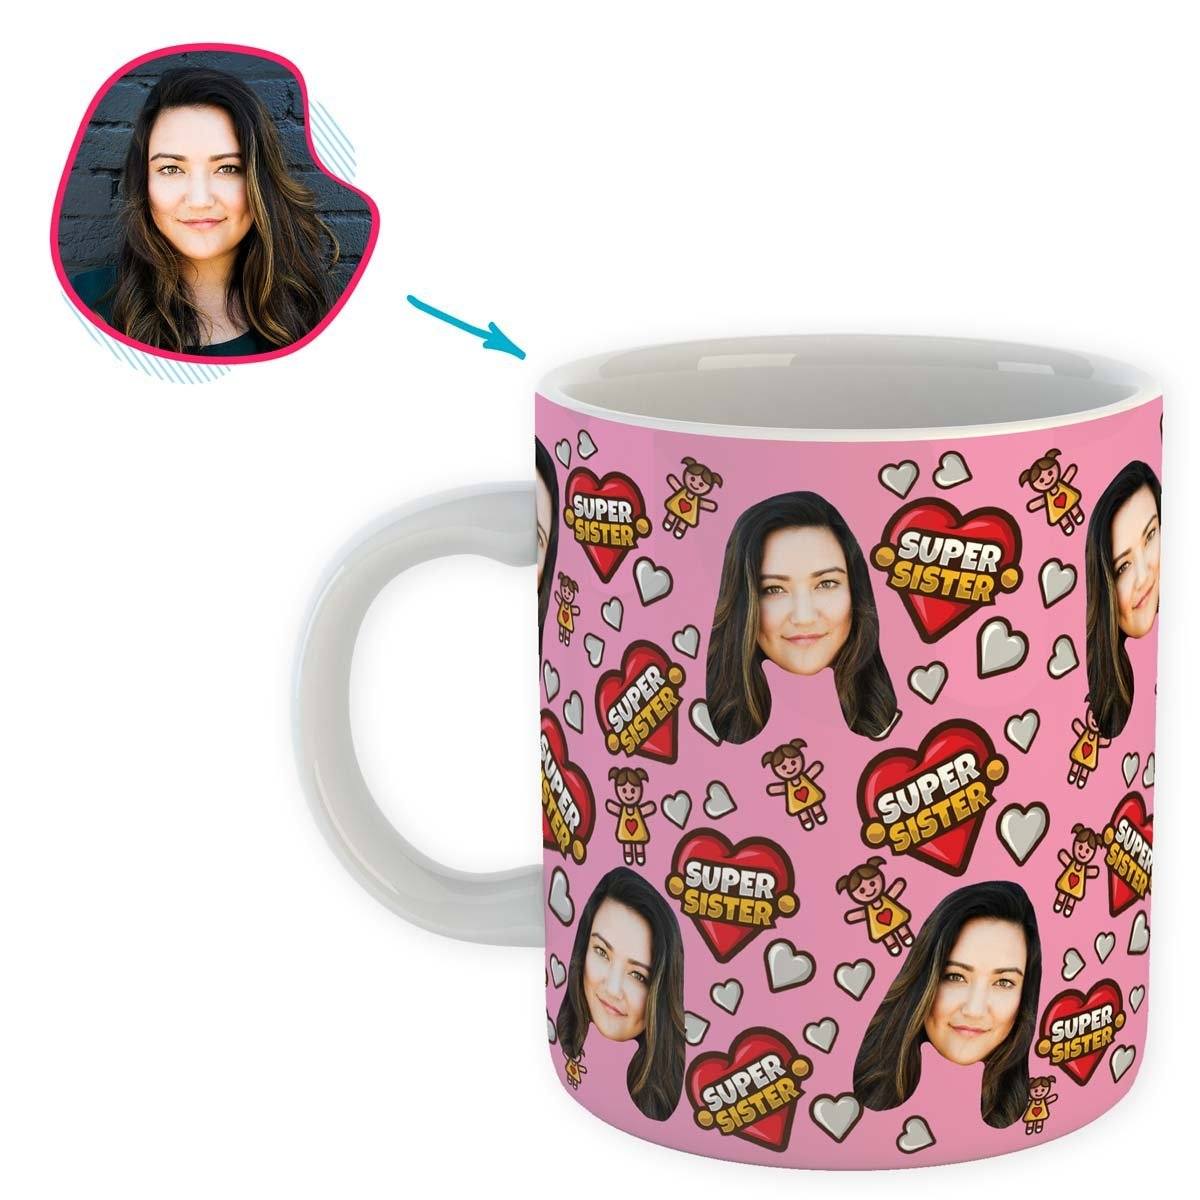 pink Super Sister mug personalized with photo of face printed on it